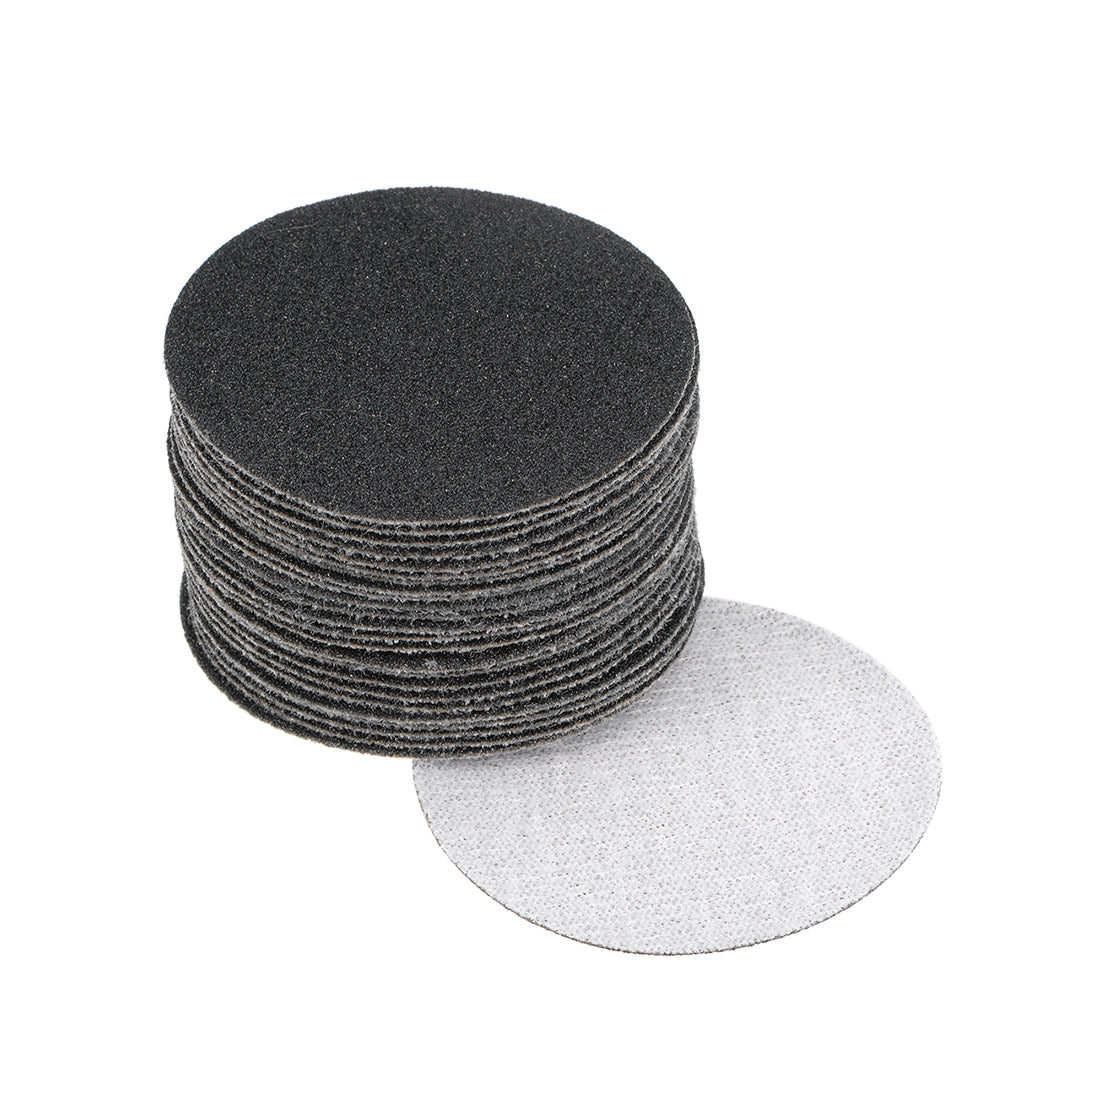 Uxcell Uxcell 2-Inch Hook and Loop Sanding Disc Wet / Dry Silicon Carbide 1500 Grit 25 Pcs